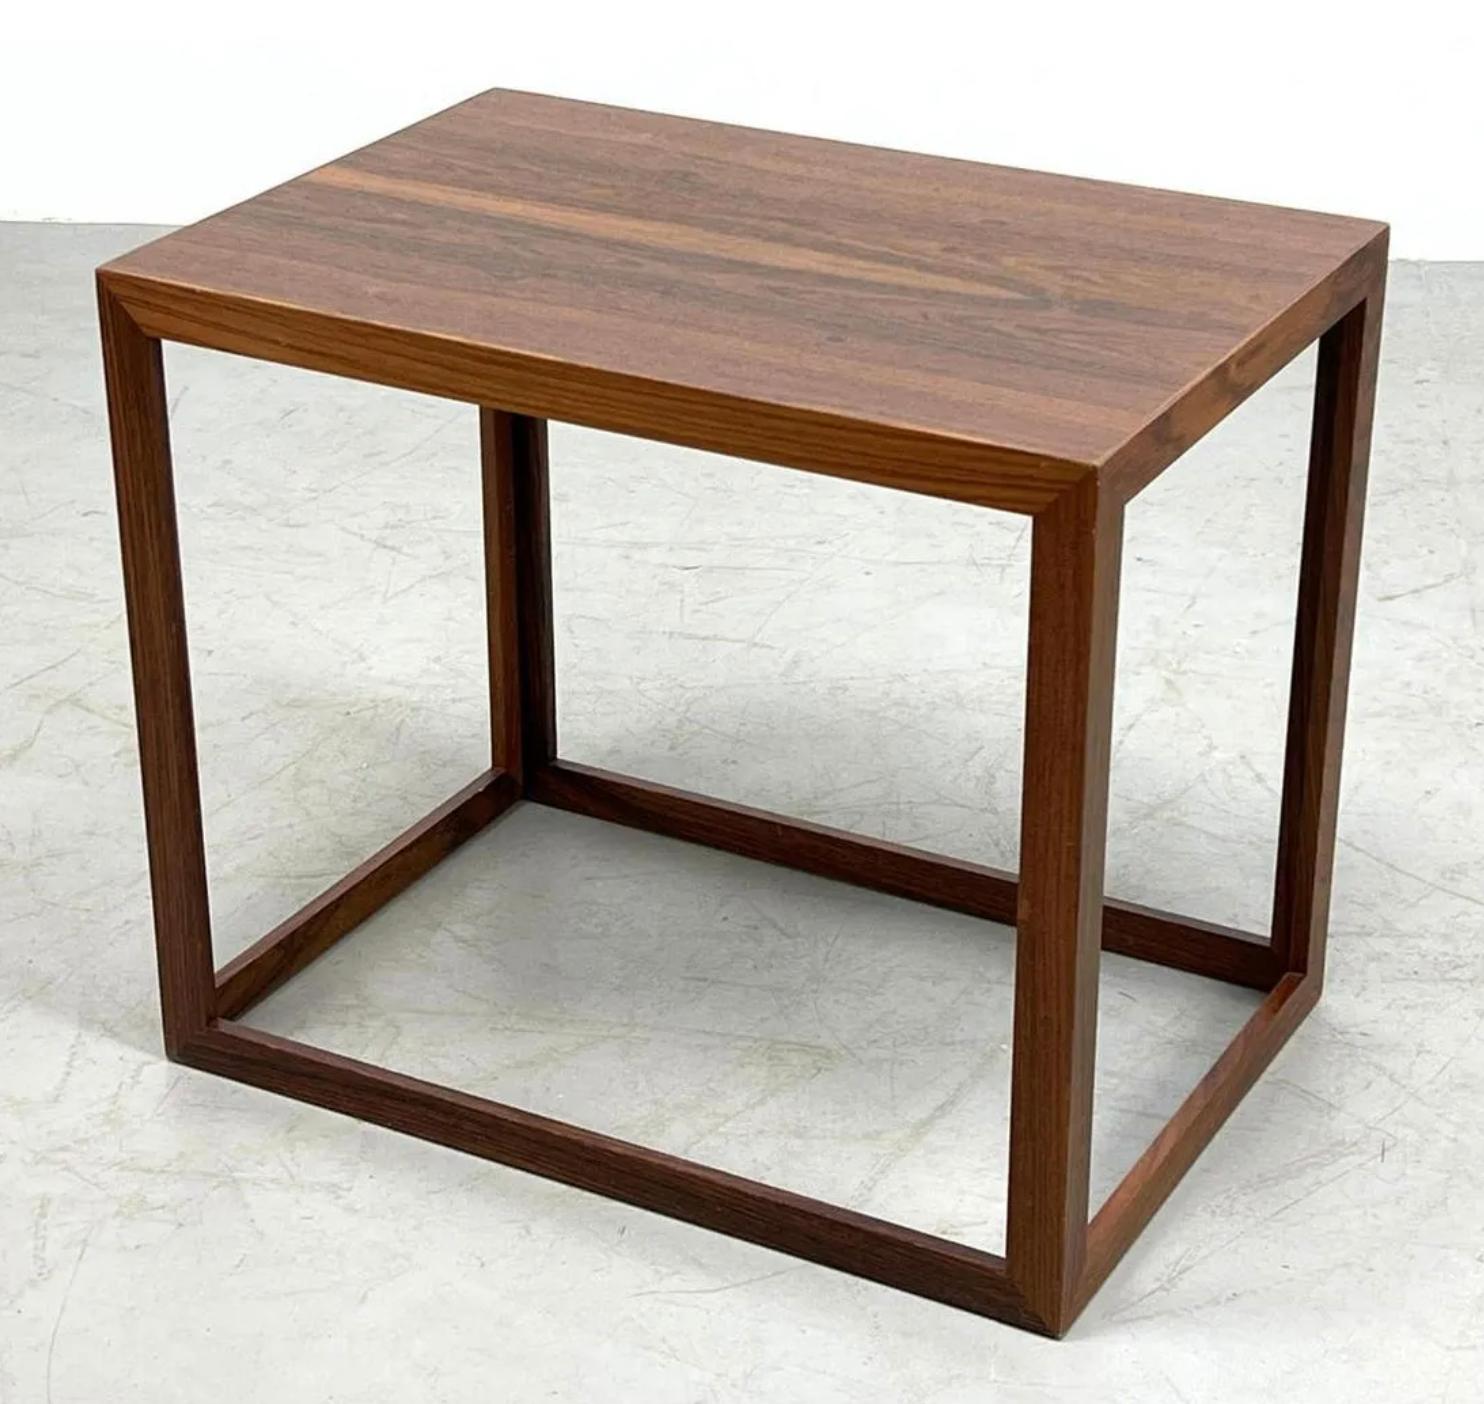 Danish modern rosewood table in the shape of an open cube. 

This side table is a work of fine material and craftsmanship with a unique geometry and symmetry. The top is a beautiful cut of rosewood with two book-matched panels, and the overall solid